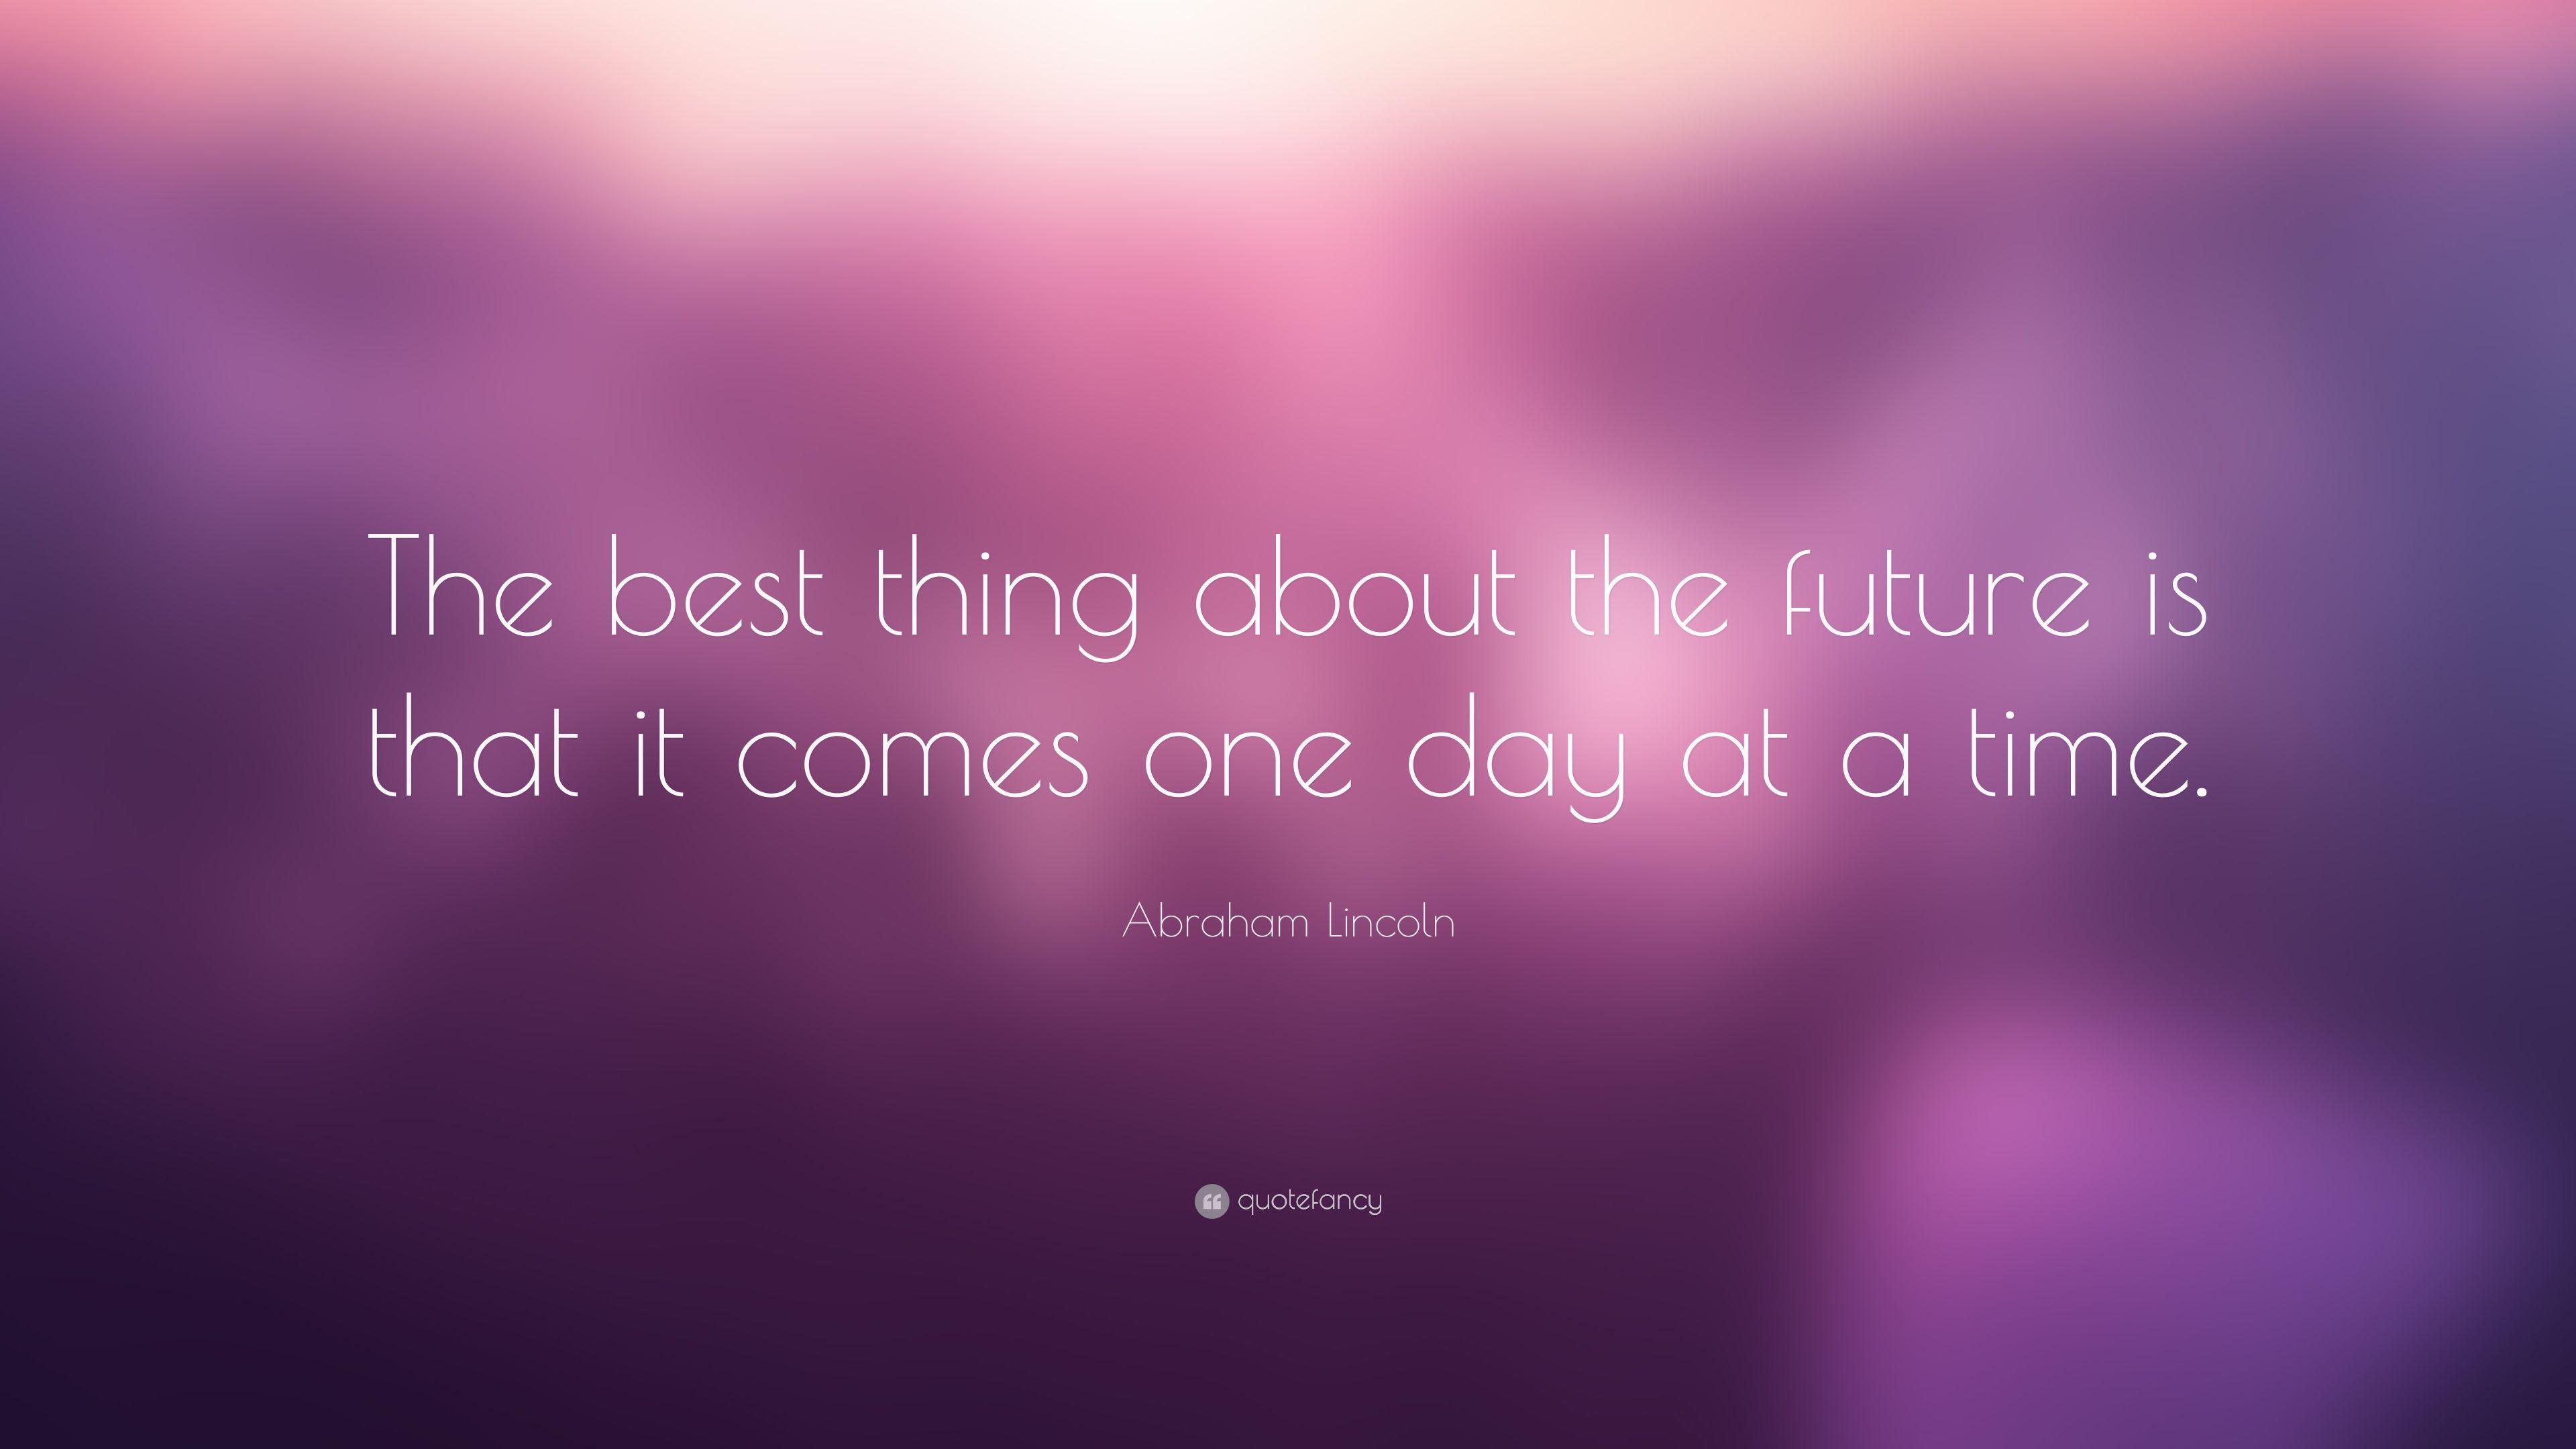 Abraham Lincoln Quote: “The best thing about the future is that it